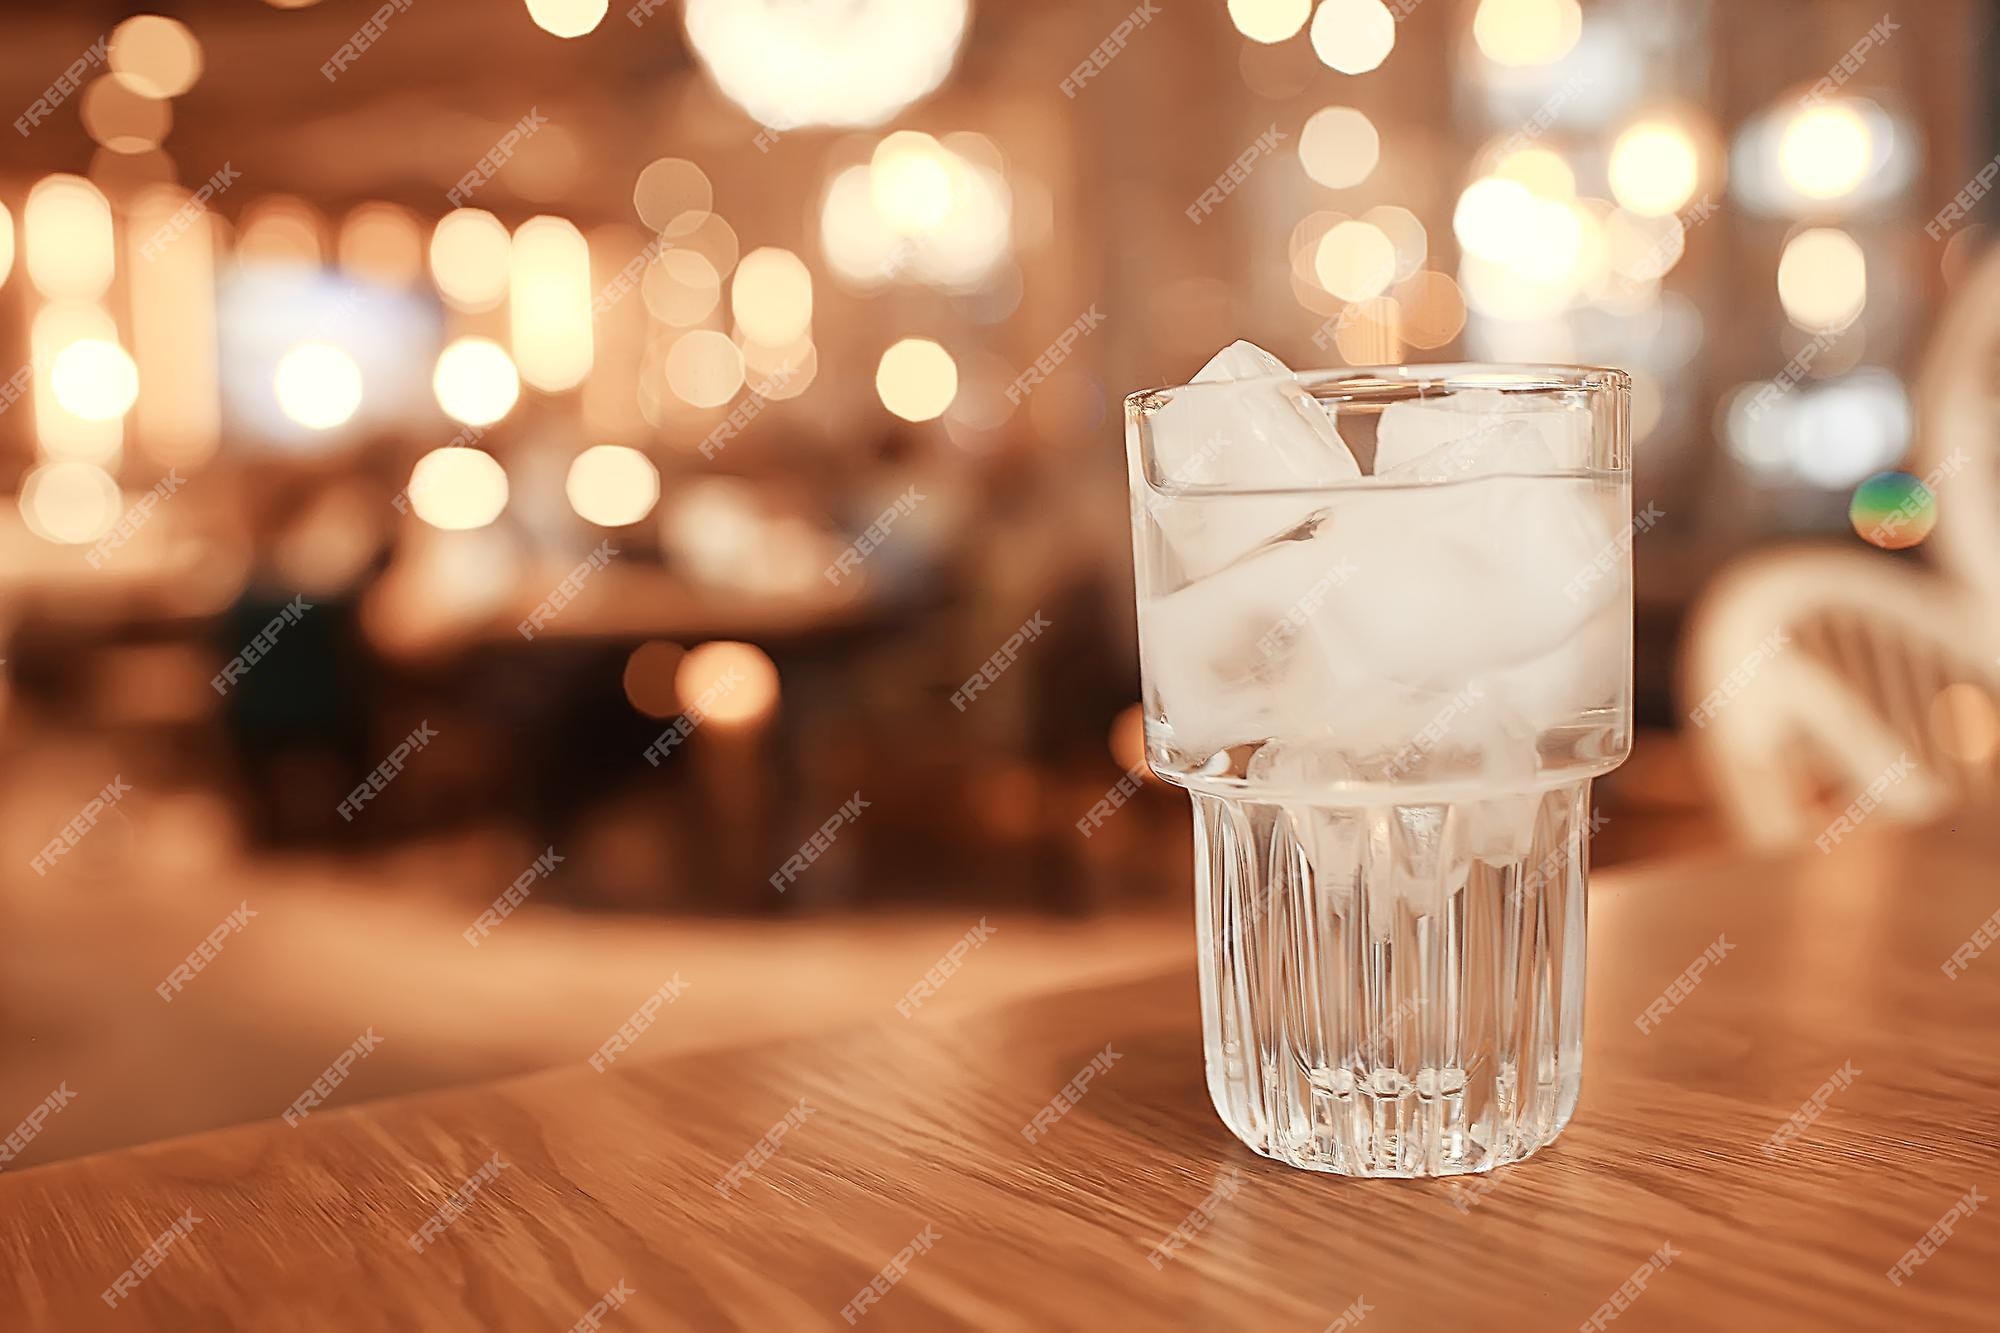 https://img.freepik.com/premium-photo/glass-water-with-ice-restaurant-cold-clear-clear-water-glass-with-ice-pieces_548821-3457.jpg?w=2000